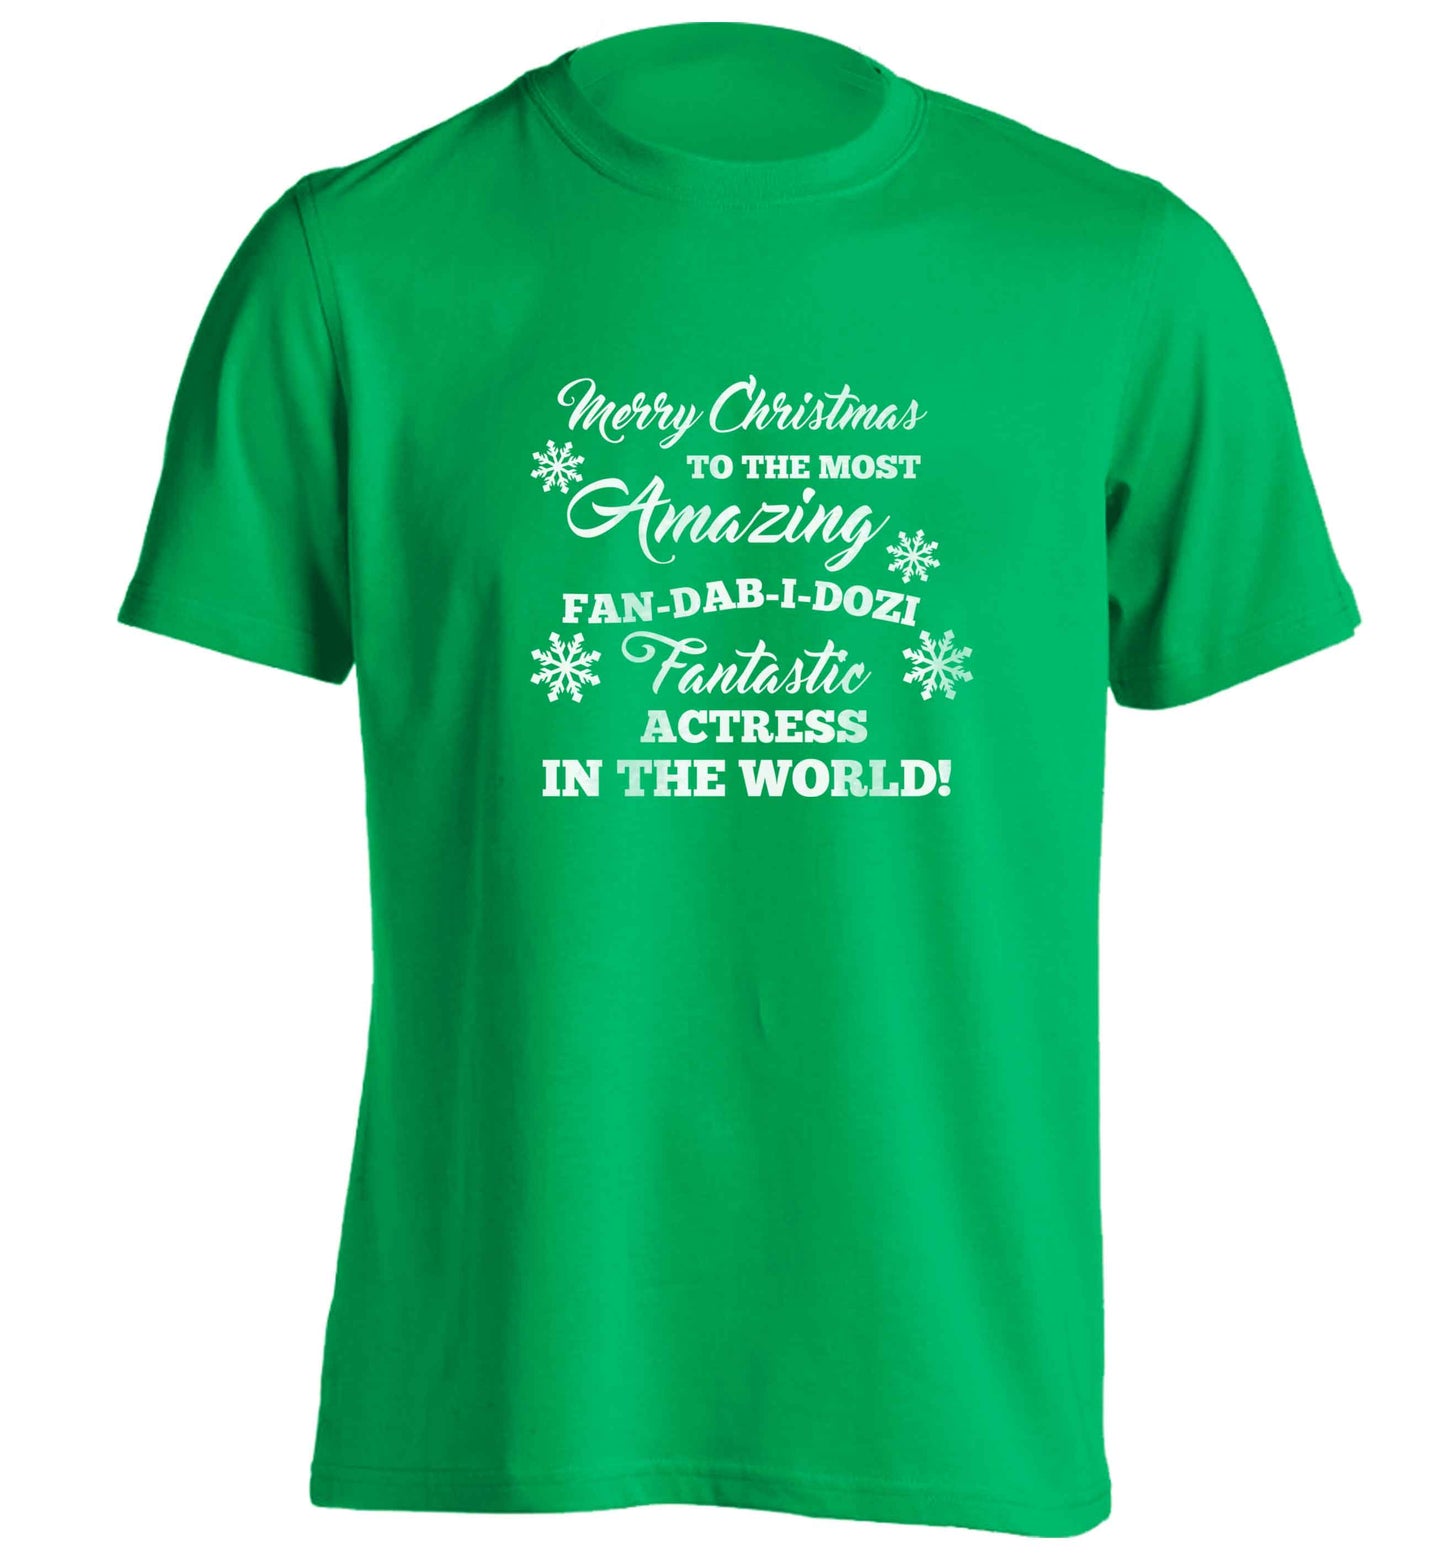 Merry Christmas to the most amazing actress in the world! adults unisex green Tshirt 2XL